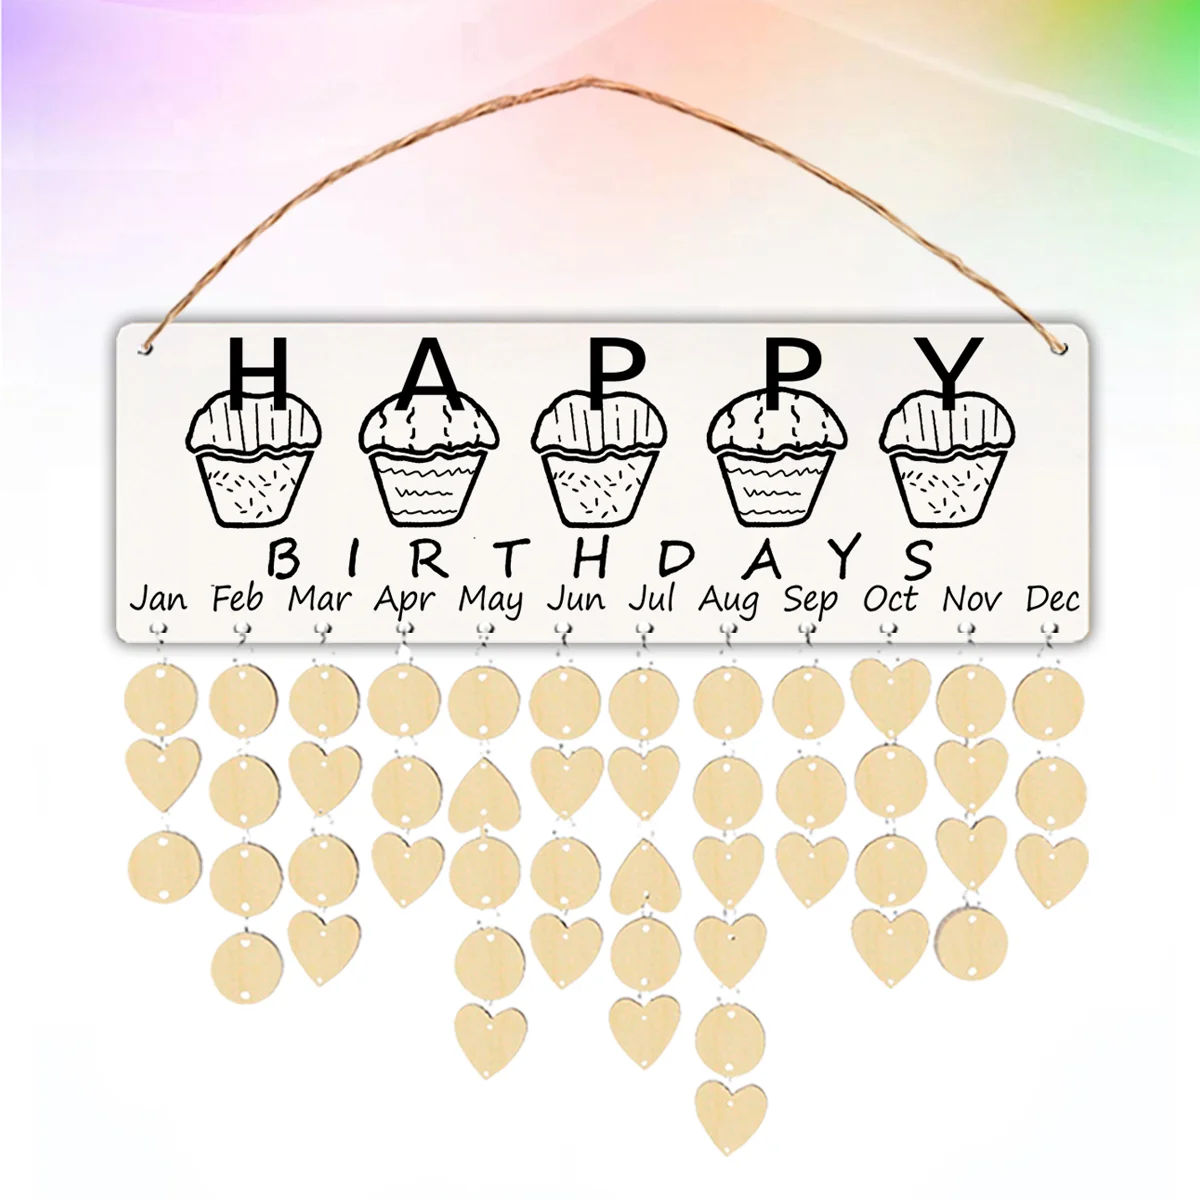 Wooden Birthday Reminder Board DIY Dates Reminder Sign Rope Hanging Events Anniversary Celebration Calendar Wall Plaque with promotional price display frame sign board with number panels